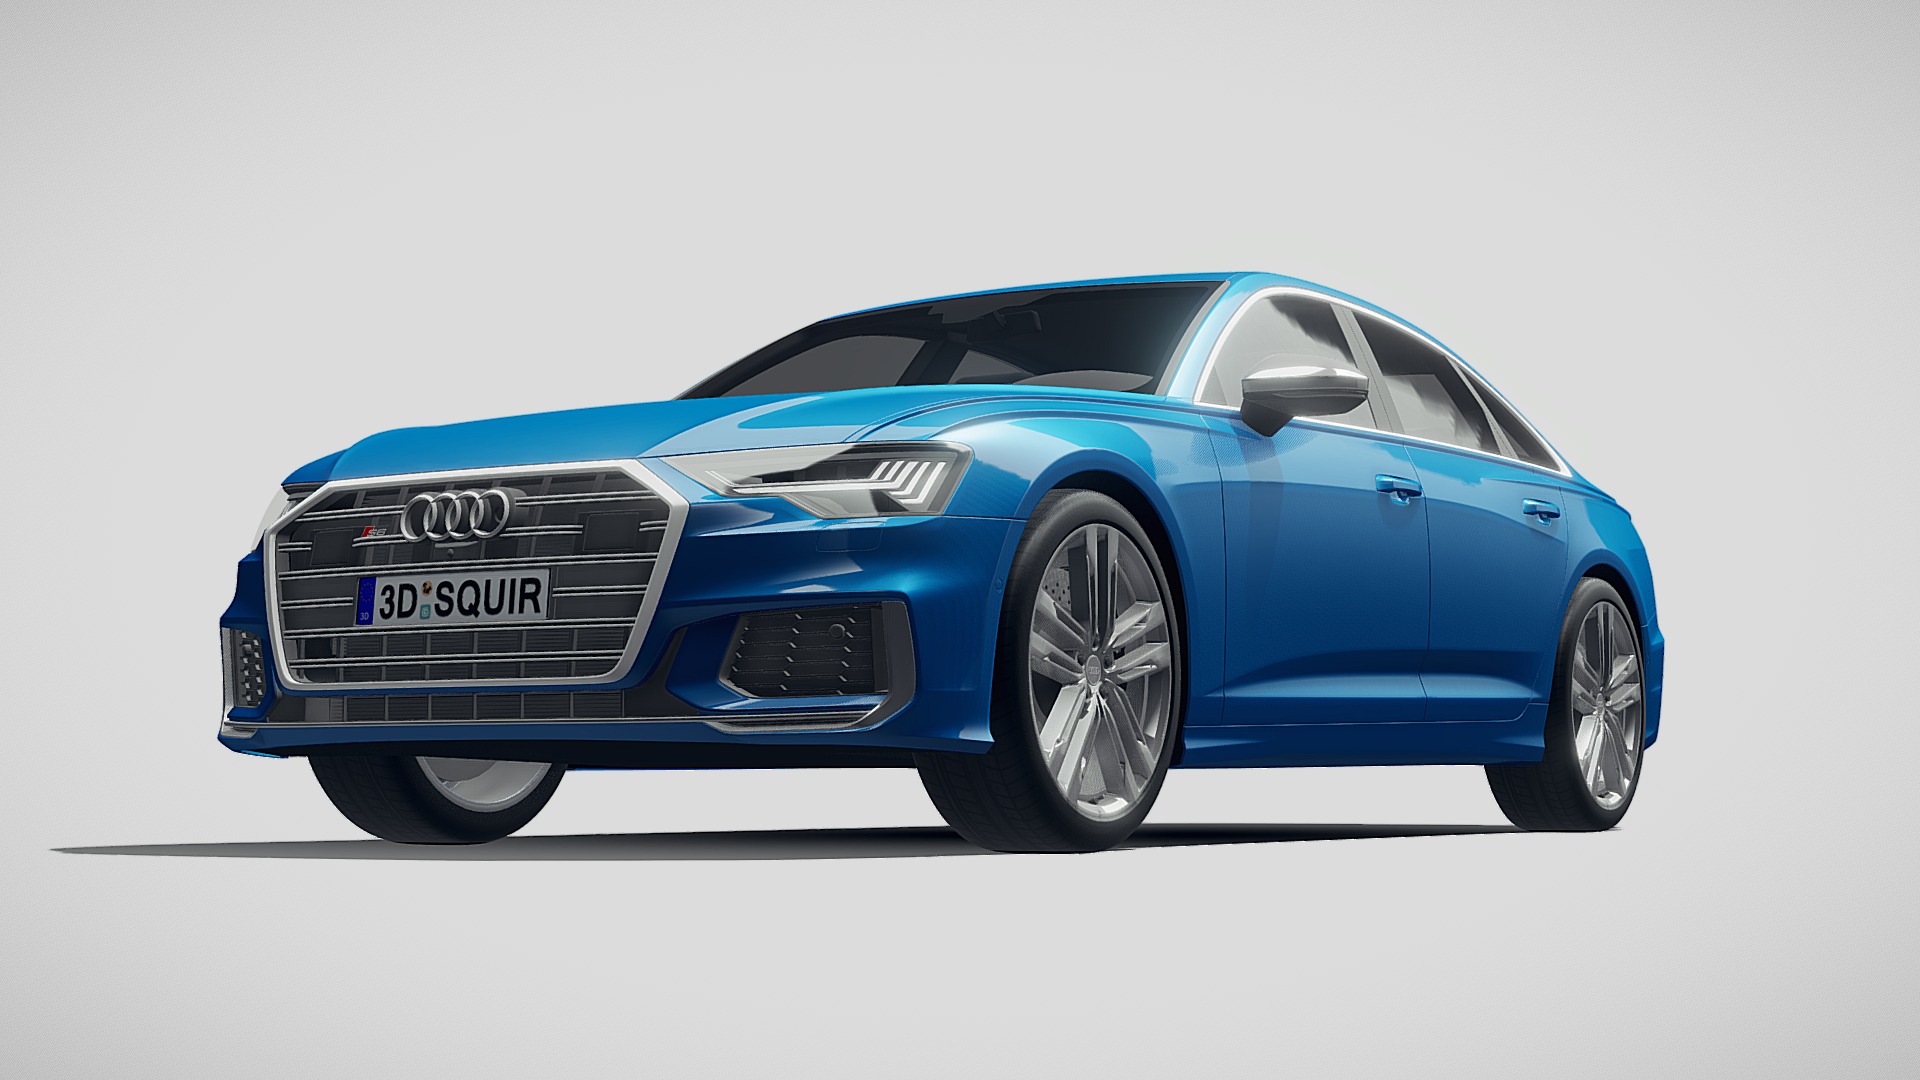 3D model Audi S6 2020 - This is a 3D model of the Audi S6 2020. The 3D model is about a blue car with a white background.